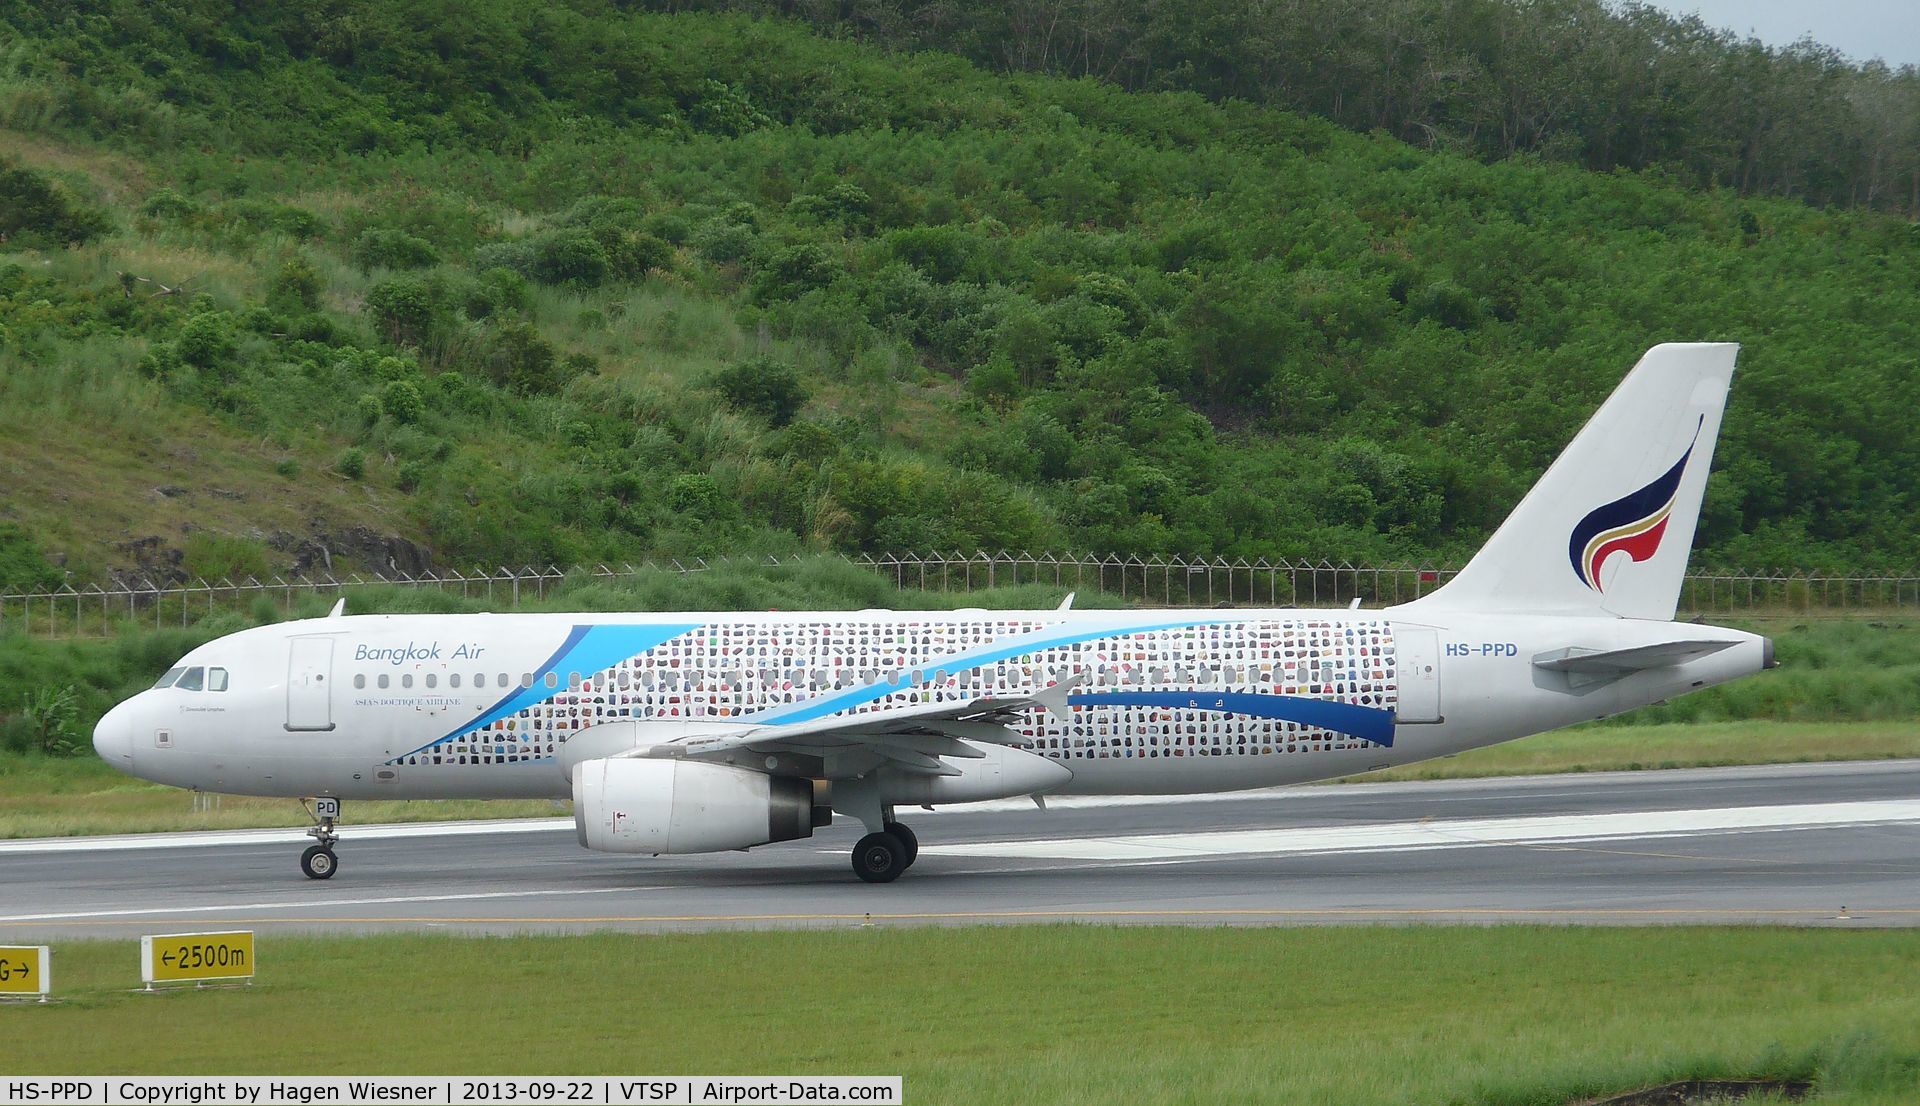 HS-PPD, Airbus A320-211 C/N 186, cool Livery,seen in Phuket